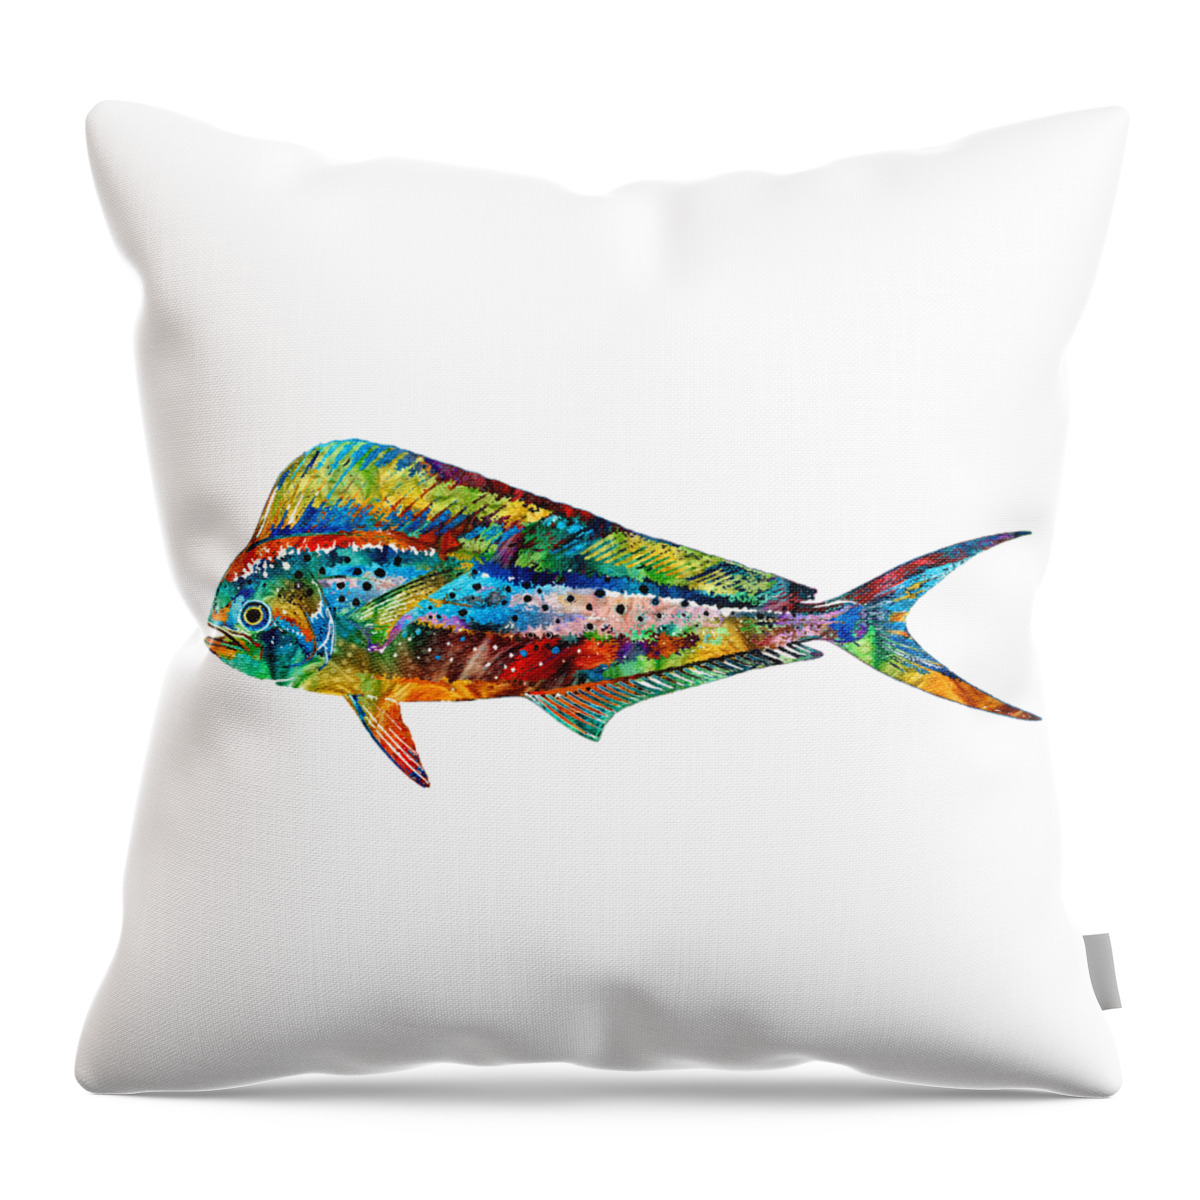 Fish Throw Pillow featuring the painting Colorful Dolphin Fish by Sharon Cummings by Sharon Cummings